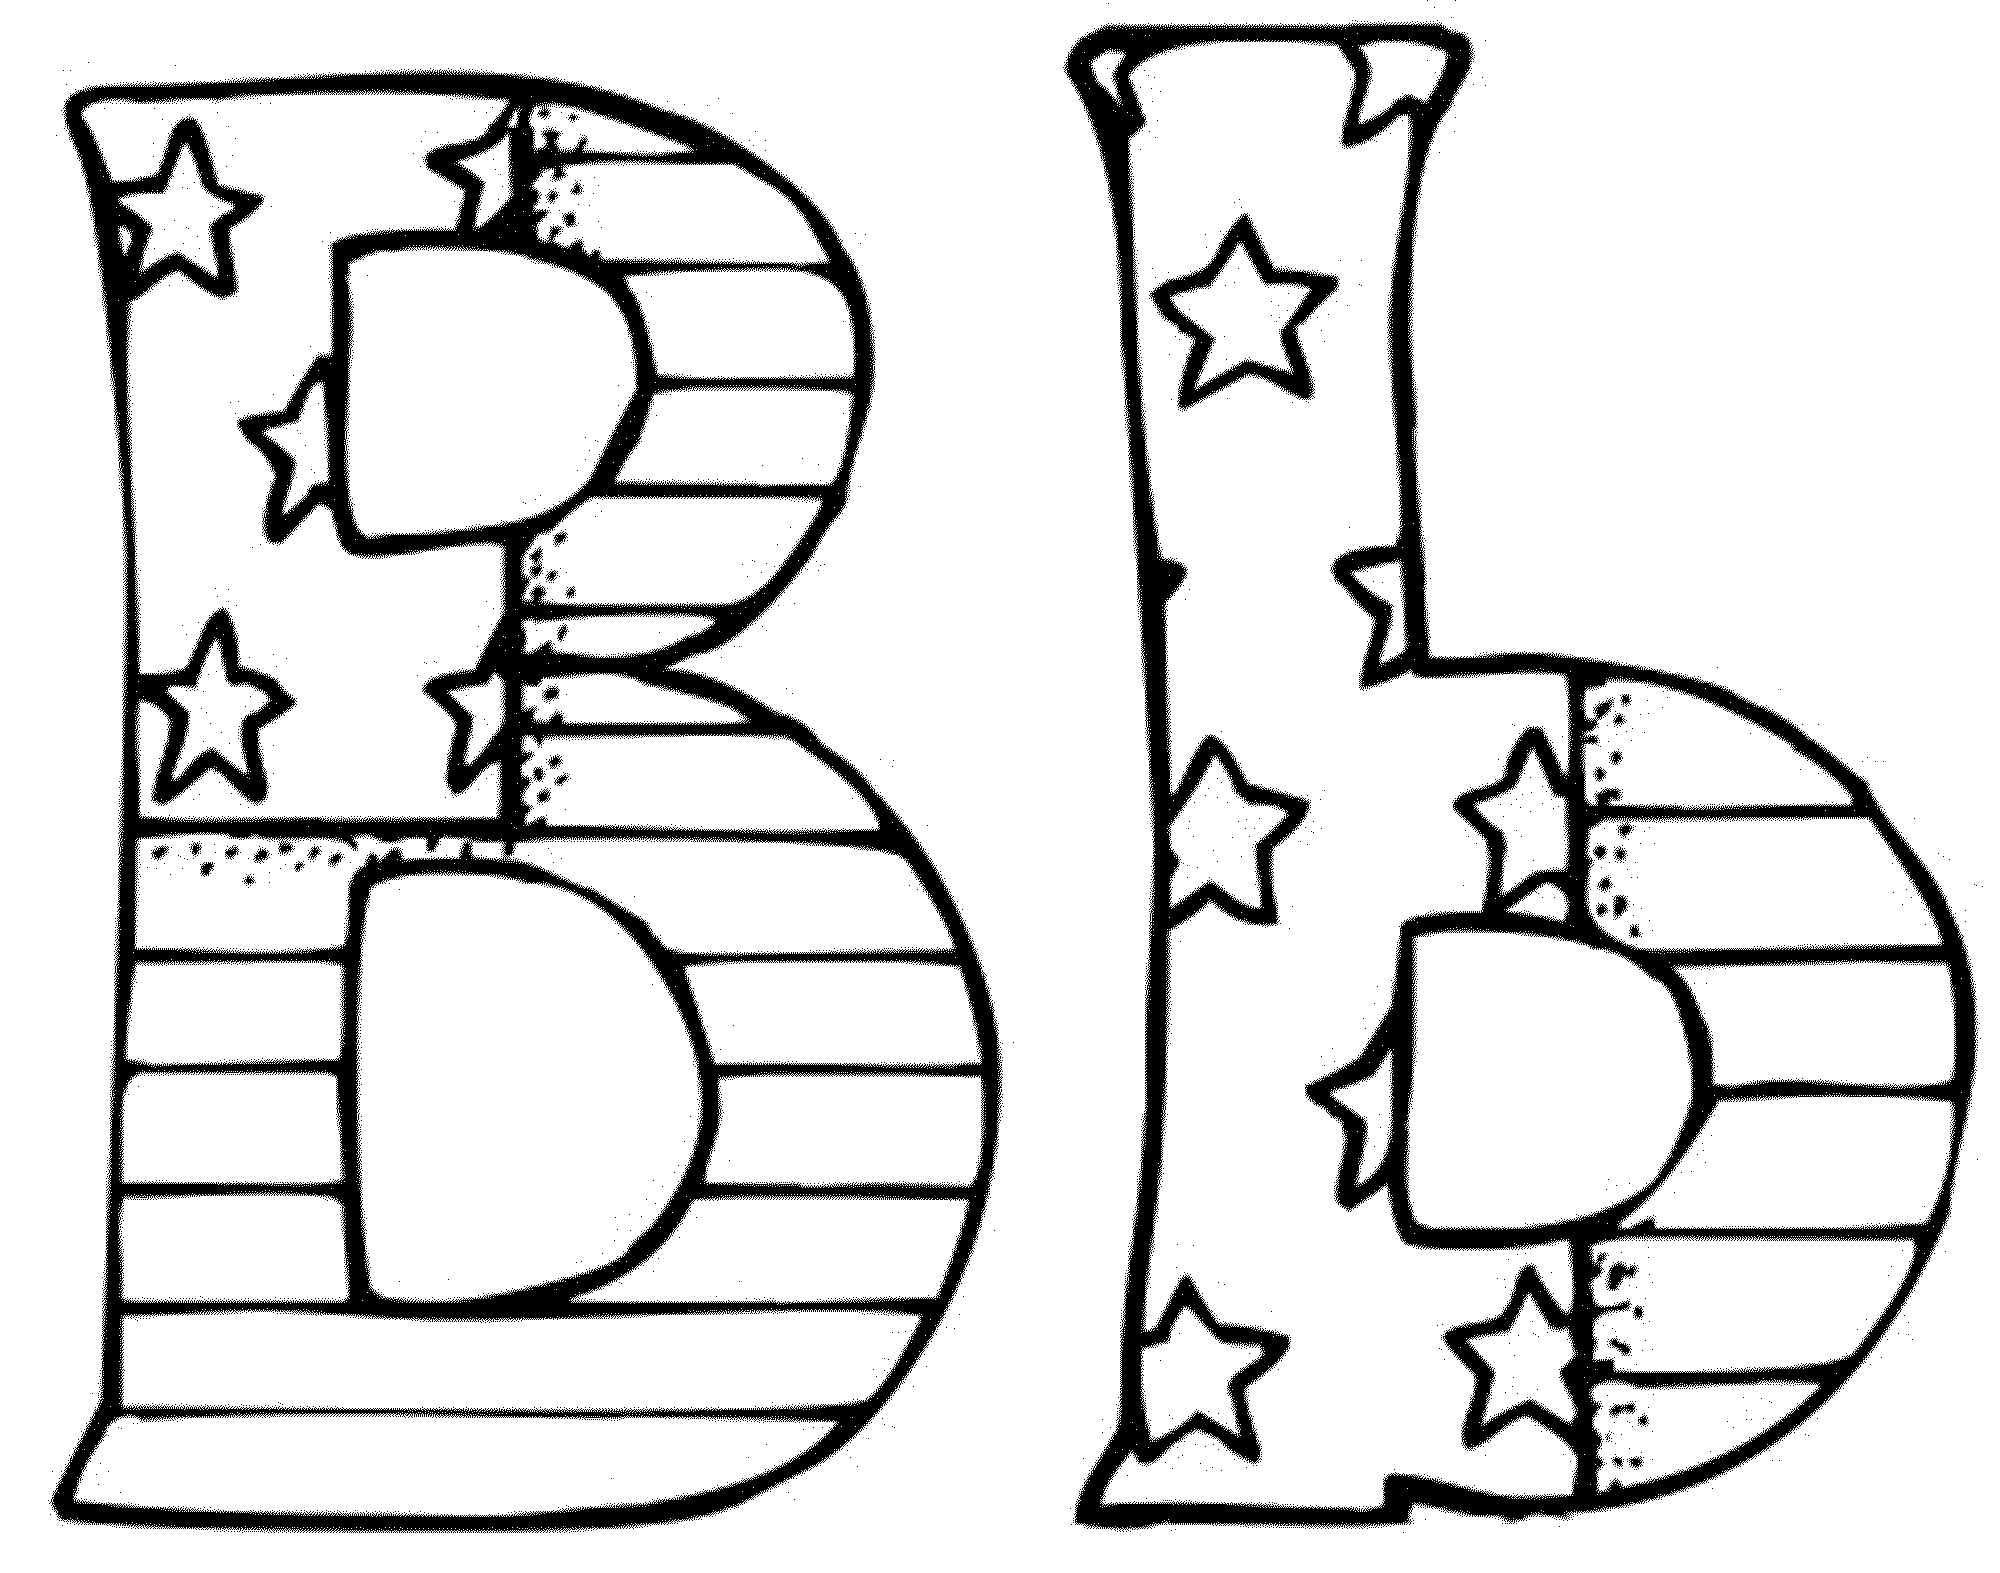 Coloring page: Alphabet (Educational) #124980 - Free Printable Coloring Pages